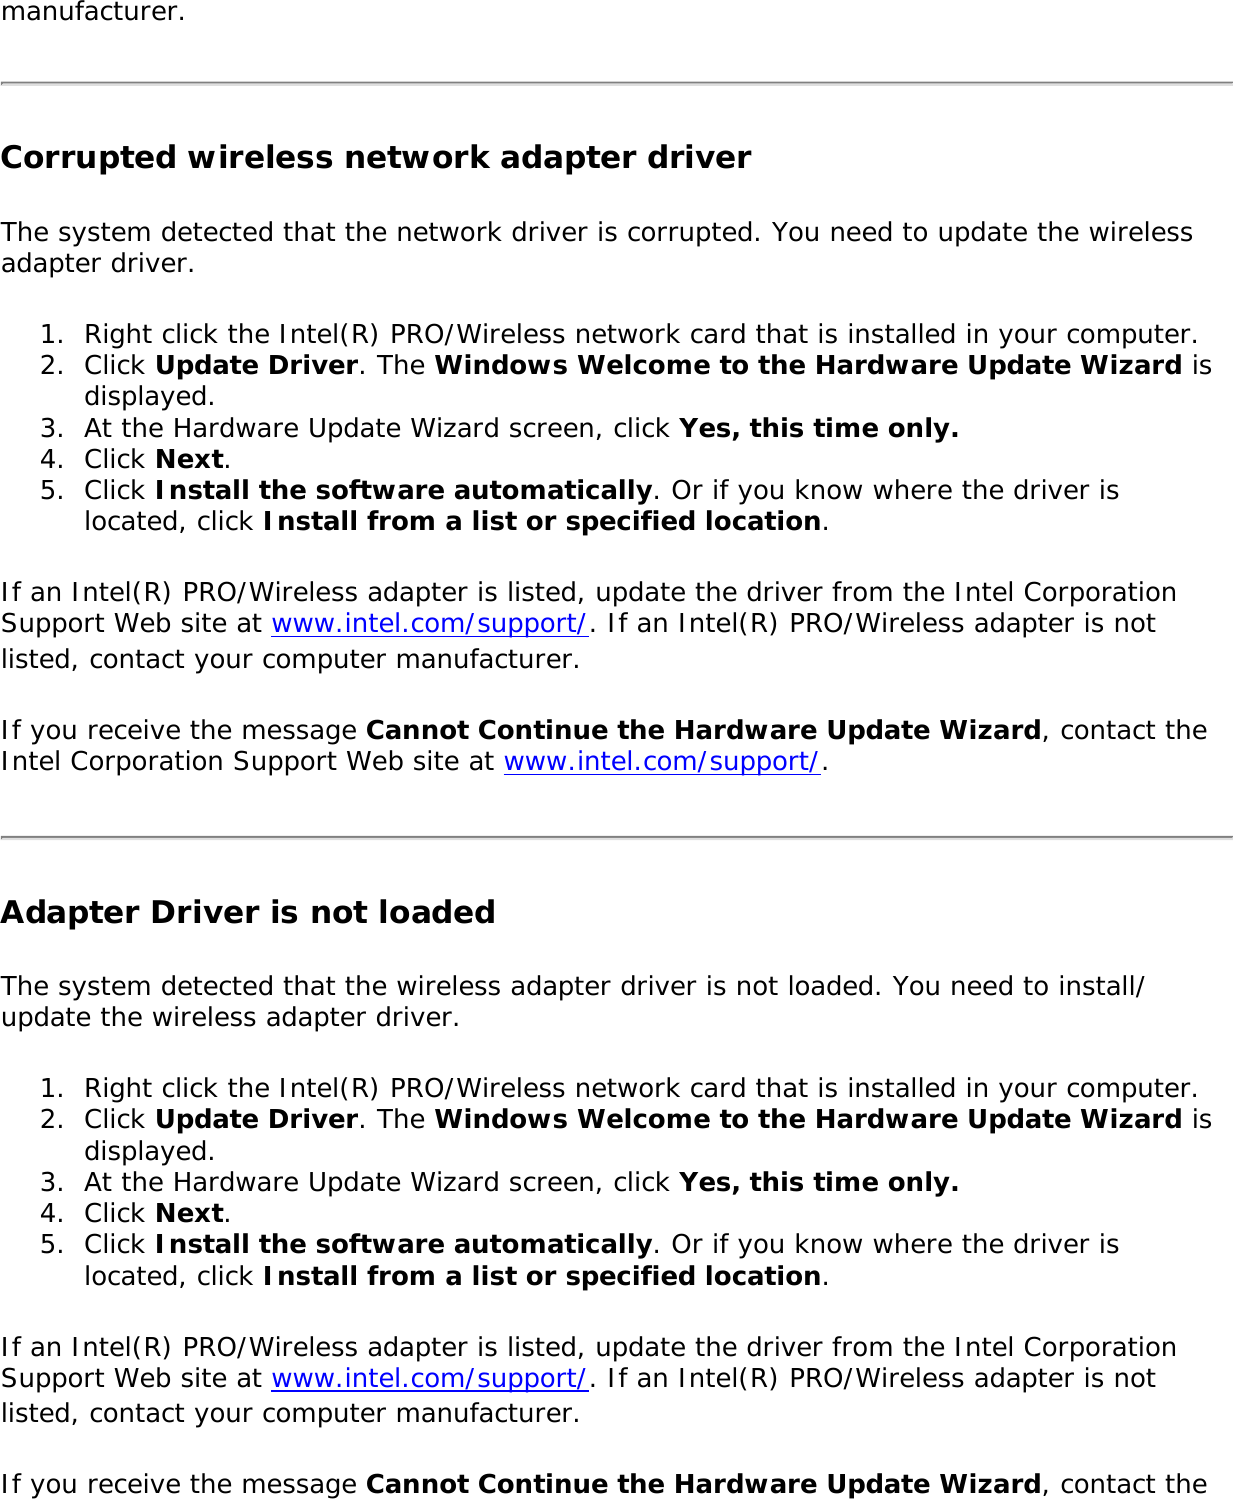 manufacturer.Corrupted wireless network adapter driverThe system detected that the network driver is corrupted. You need to update the wireless adapter driver.1.  Right click the Intel(R) PRO/Wireless network card that is installed in your computer.2.  Click Update Driver. The Windows Welcome to the Hardware Update Wizard is displayed.3.  At the Hardware Update Wizard screen, click Yes, this time only.4.  Click Next.5.  Click Install the software automatically. Or if you know where the driver is located, click Install from a list or specified location.If an Intel(R) PRO/Wireless adapter is listed, update the driver from the Intel Corporation Support Web site at www.intel.com/support/. If an Intel(R) PRO/Wireless adapter is not listed, contact your computer manufacturer.If you receive the message Cannot Continue the Hardware Update Wizard, contact the Intel Corporation Support Web site at www.intel.com/support/.Adapter Driver is not loadedThe system detected that the wireless adapter driver is not loaded. You need to install/update the wireless adapter driver.1.  Right click the Intel(R) PRO/Wireless network card that is installed in your computer.2.  Click Update Driver. The Windows Welcome to the Hardware Update Wizard is displayed.3.  At the Hardware Update Wizard screen, click Yes, this time only.4.  Click Next.5.  Click Install the software automatically. Or if you know where the driver is located, click Install from a list or specified location.If an Intel(R) PRO/Wireless adapter is listed, update the driver from the Intel Corporation Support Web site at www.intel.com/support/. If an Intel(R) PRO/Wireless adapter is not listed, contact your computer manufacturer.If you receive the message Cannot Continue the Hardware Update Wizard, contact the 